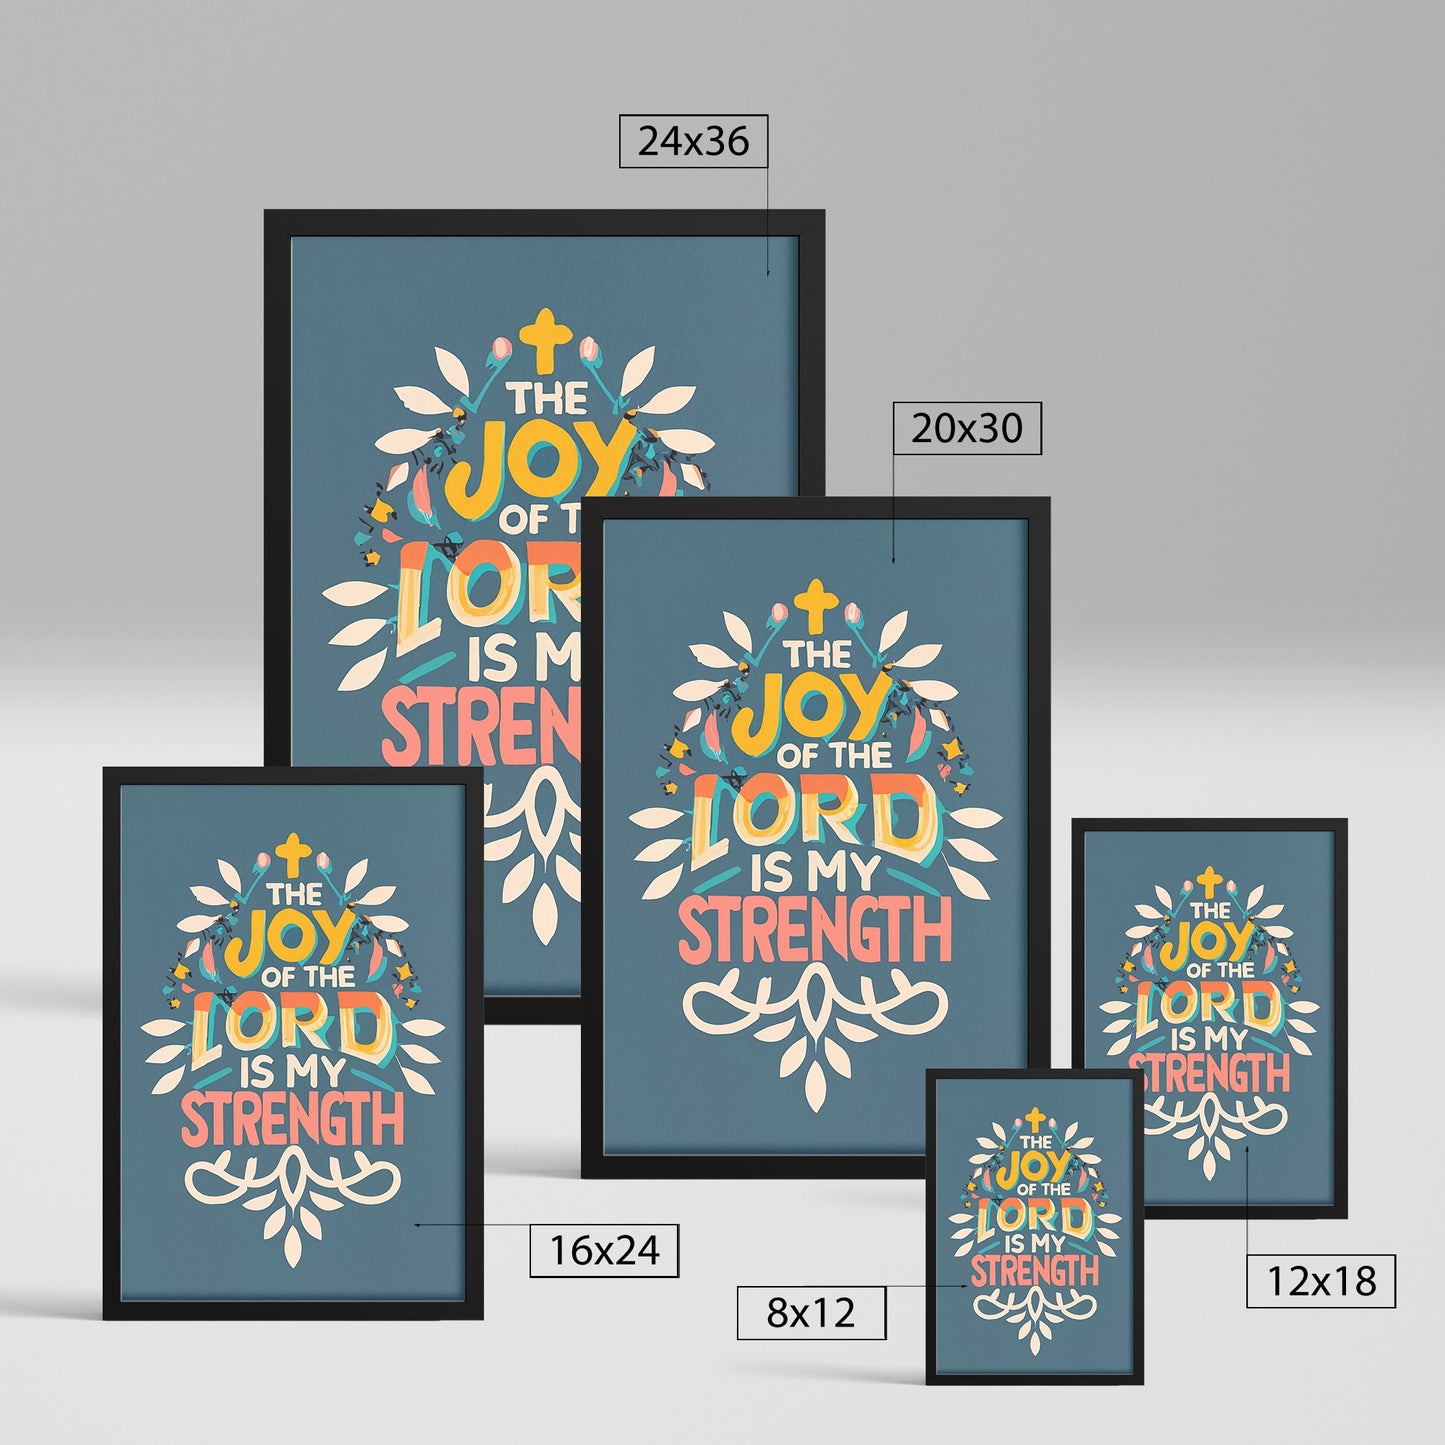 The Joy of the Lord is My Strength Retro Style Framed Print